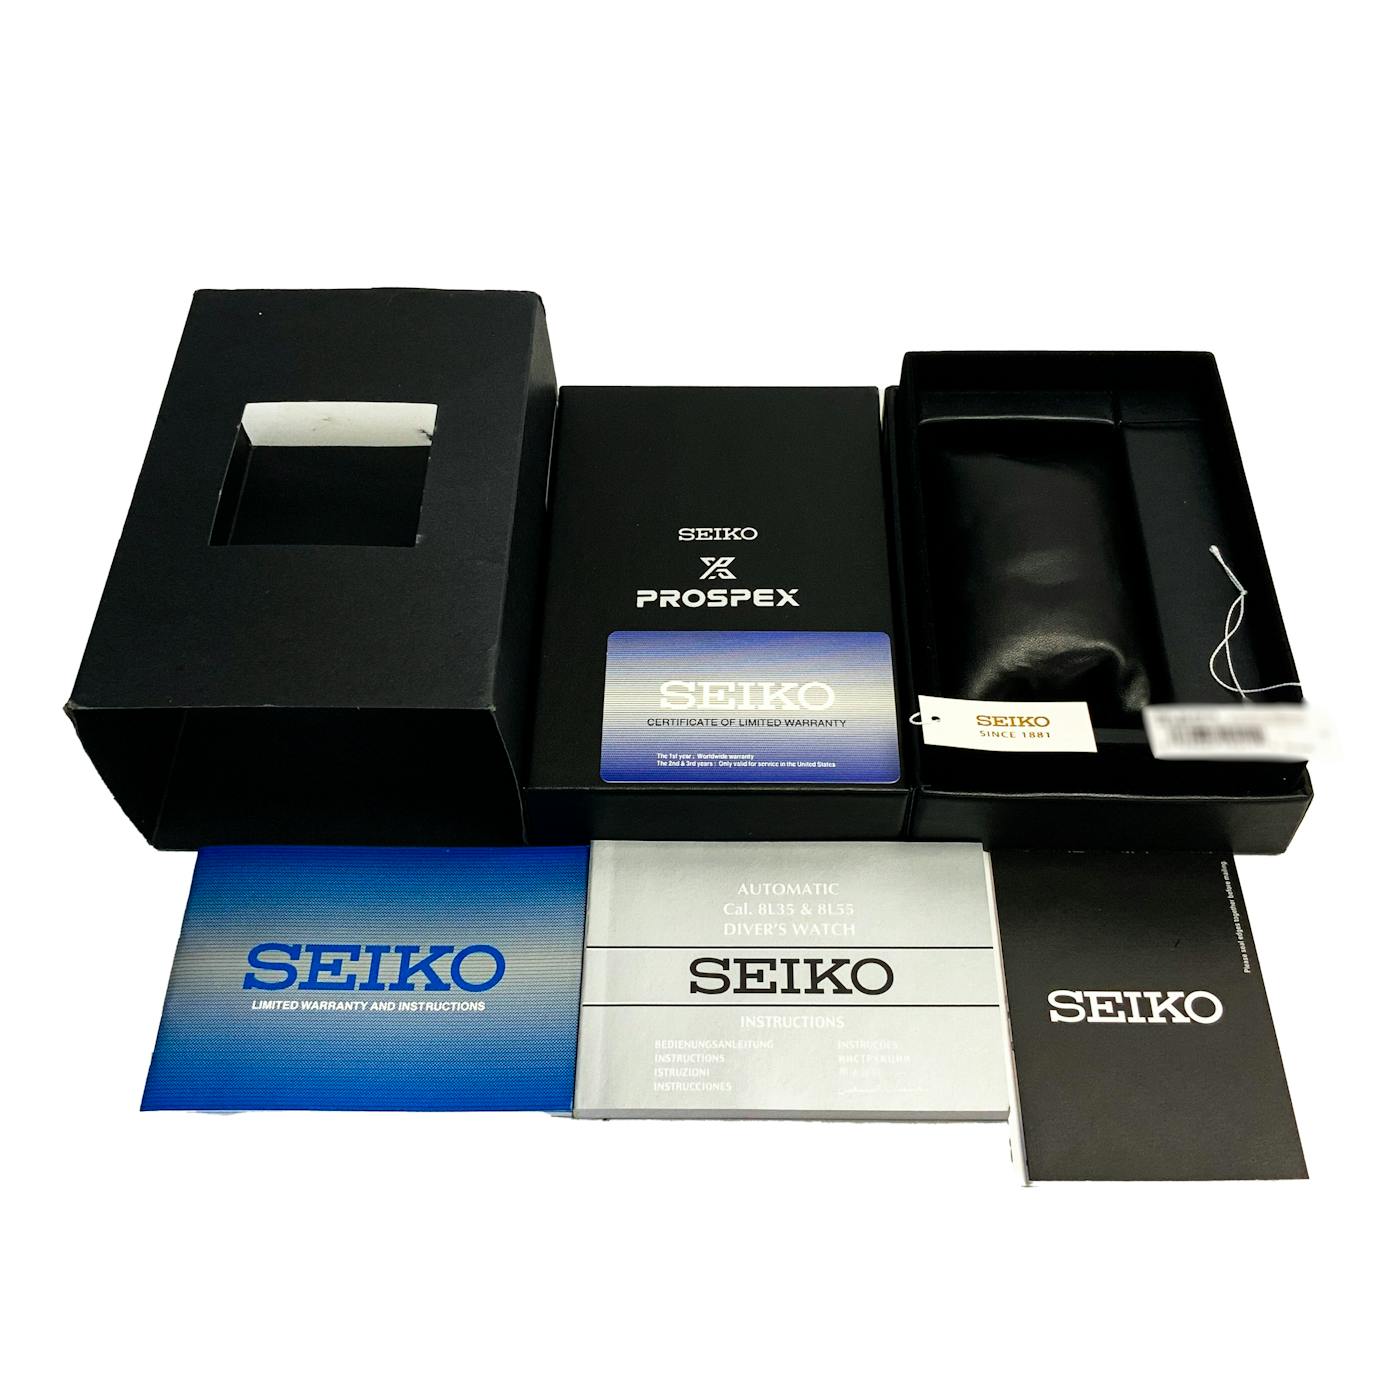 Pre-Owned Seiko Prospex Diver 300m Limited Edition SLA019 | WatchBox